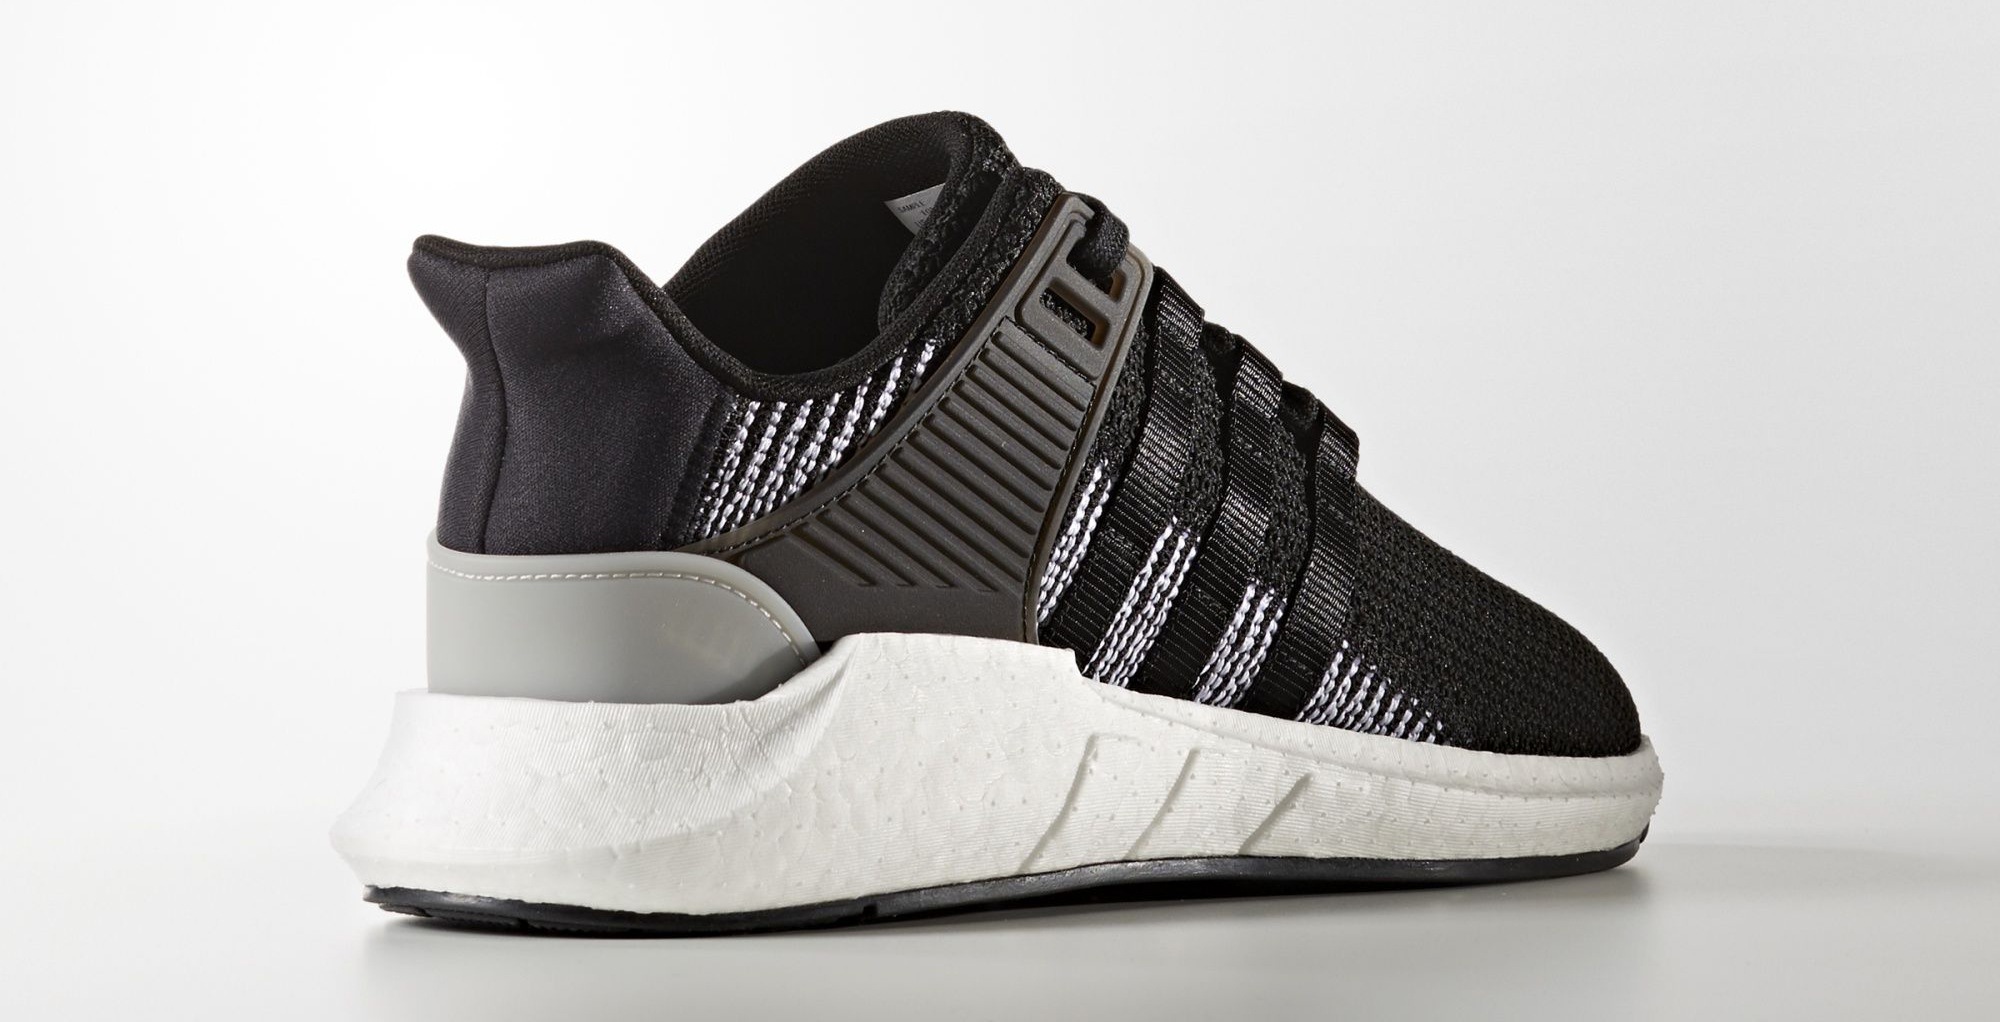 adidas-eqt-support-9317-textile-core-black-running-white-1